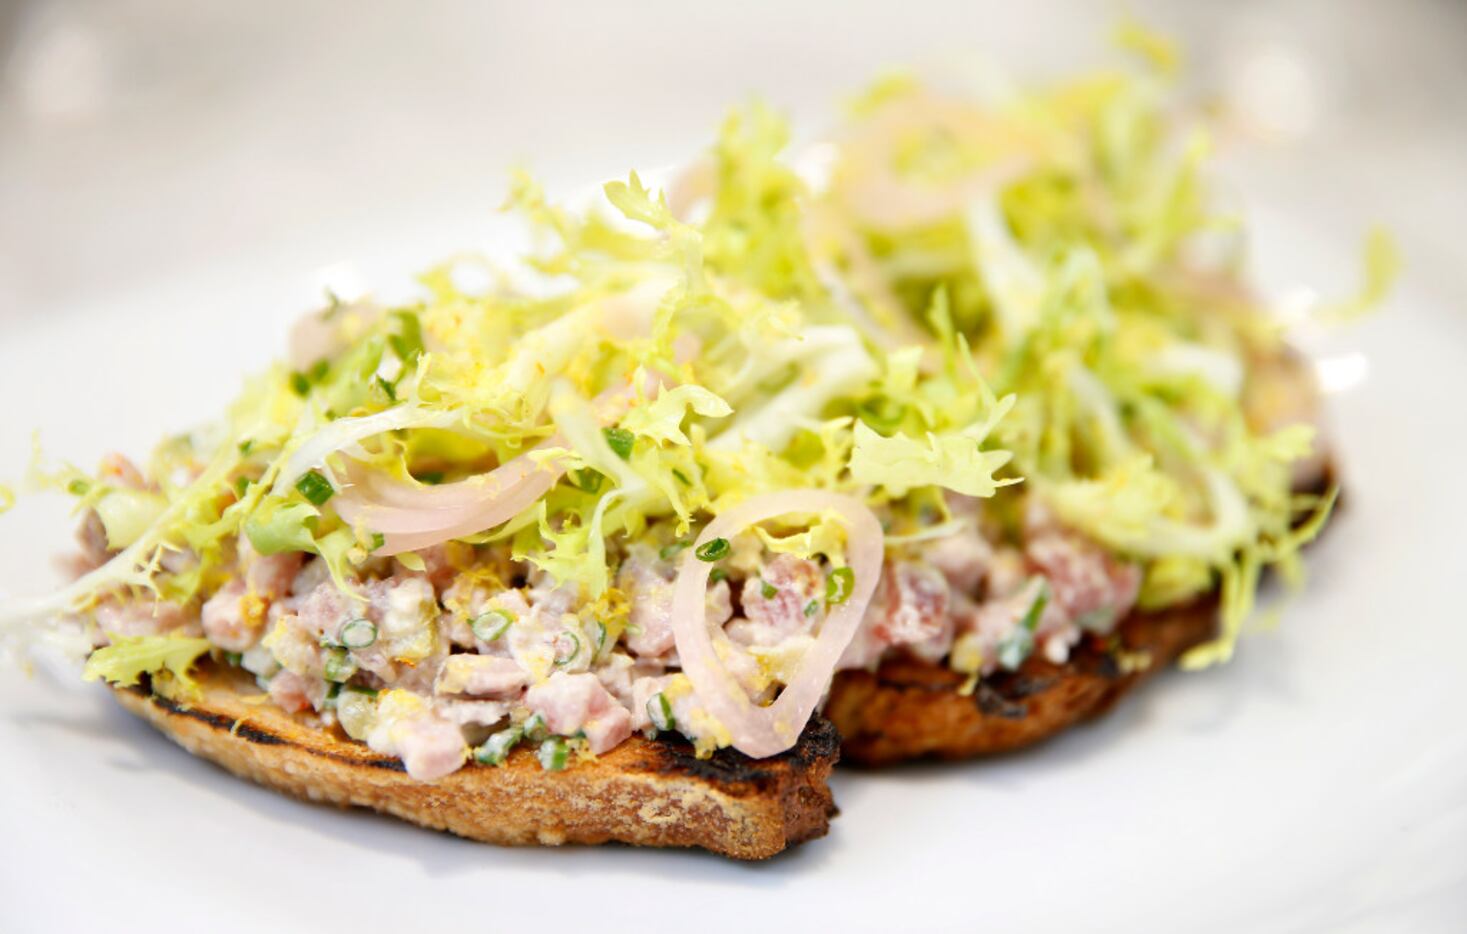 Mirador's tuna tartine – diced rare tuna dressed in tonnato sauce with with a touch of...